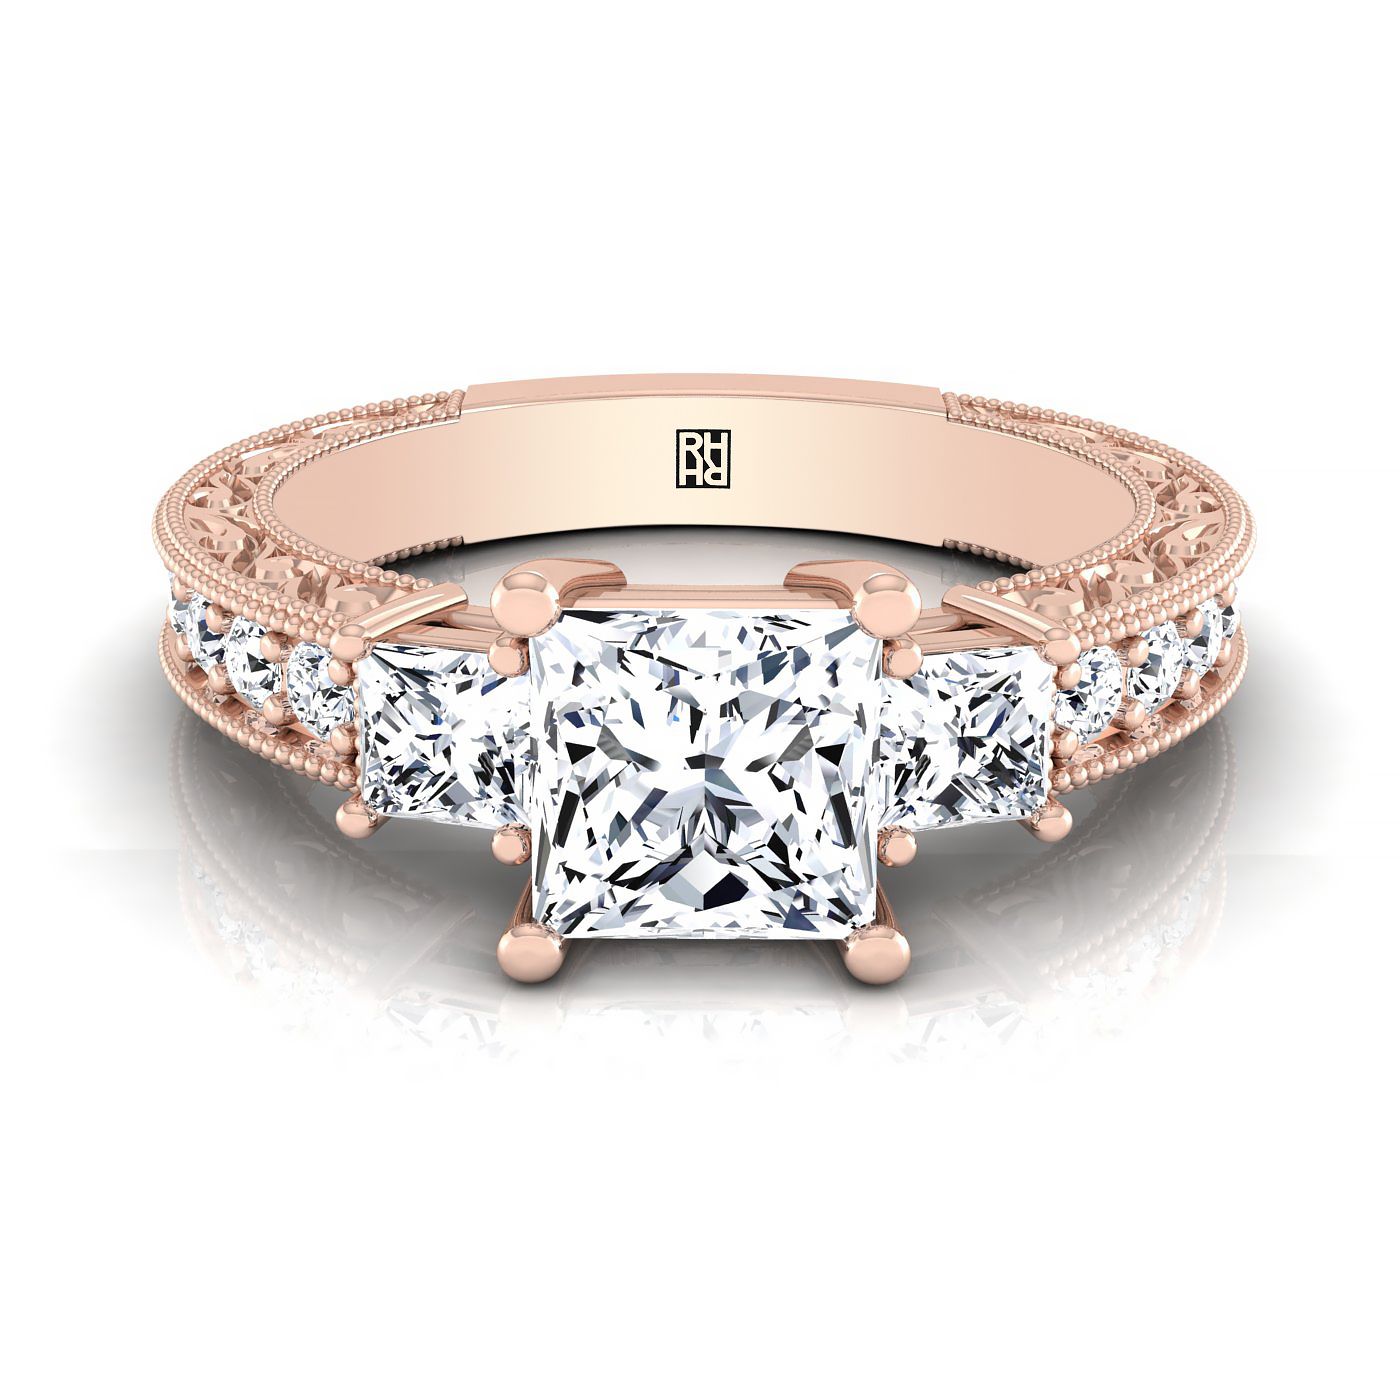 14K Rose Gold Princess Cut Diamond Hand Engraved Three Stone Vintage Channel Engagement Ring -3/4ctw